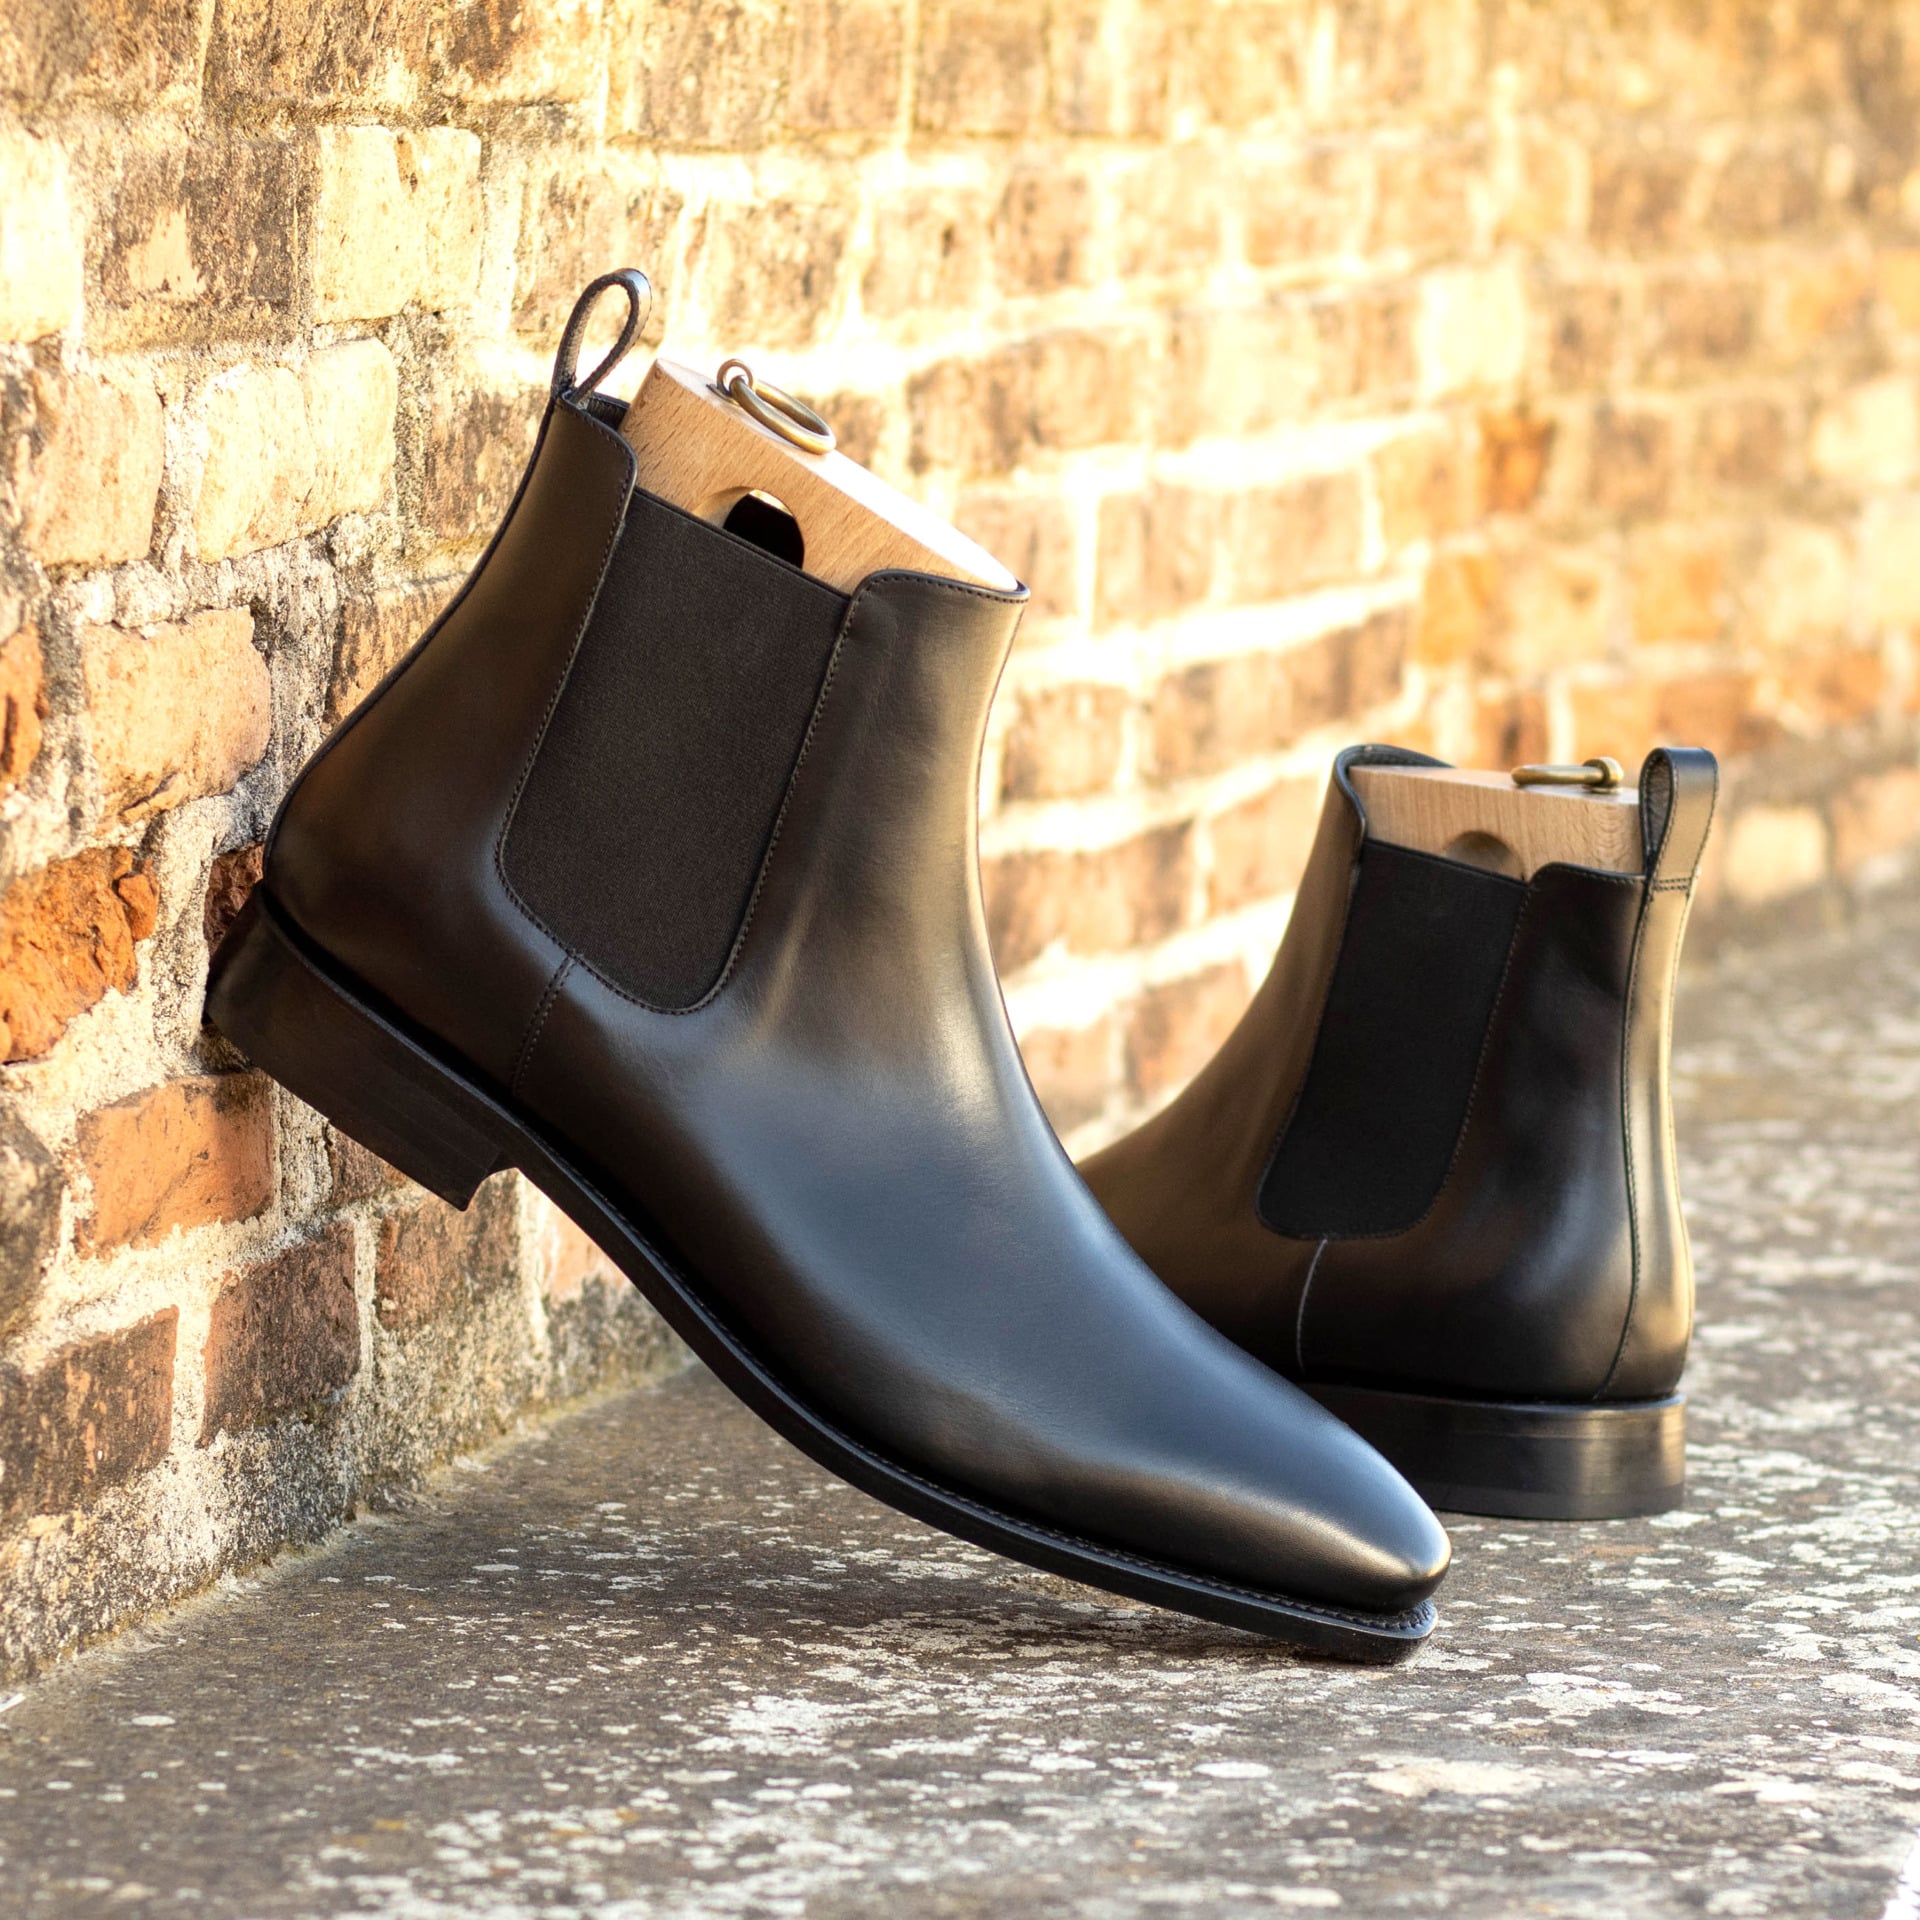 Introducing The Fulton St. Chelsea Boots: A Fusion of Elegance and Craftsmanship by Robert August